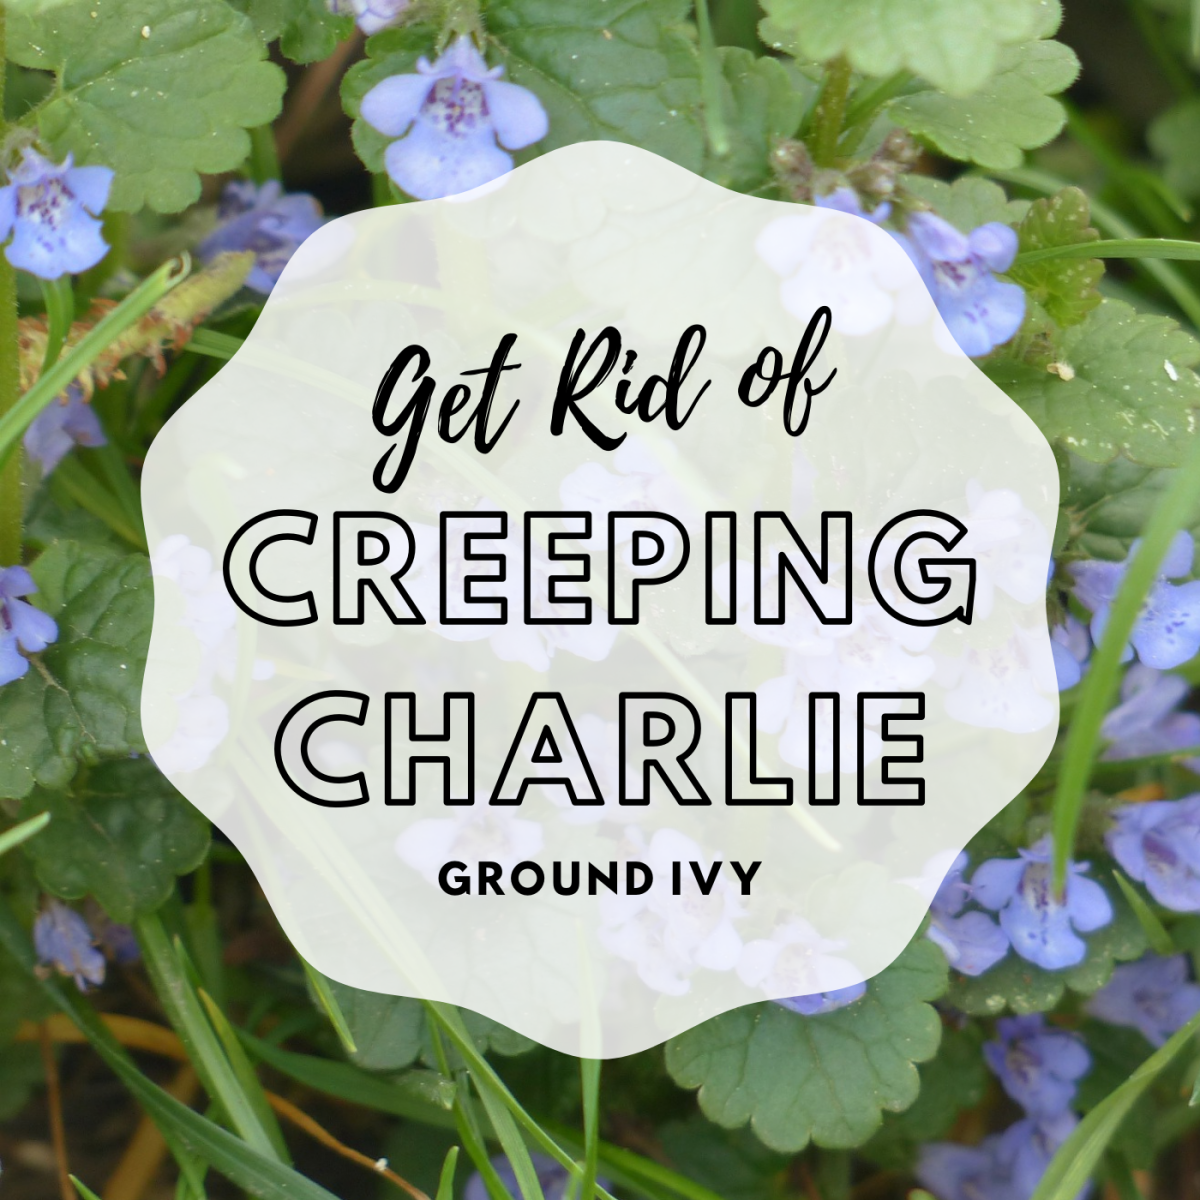 Learn how to eradicate unwanted ground ivy from your yard.